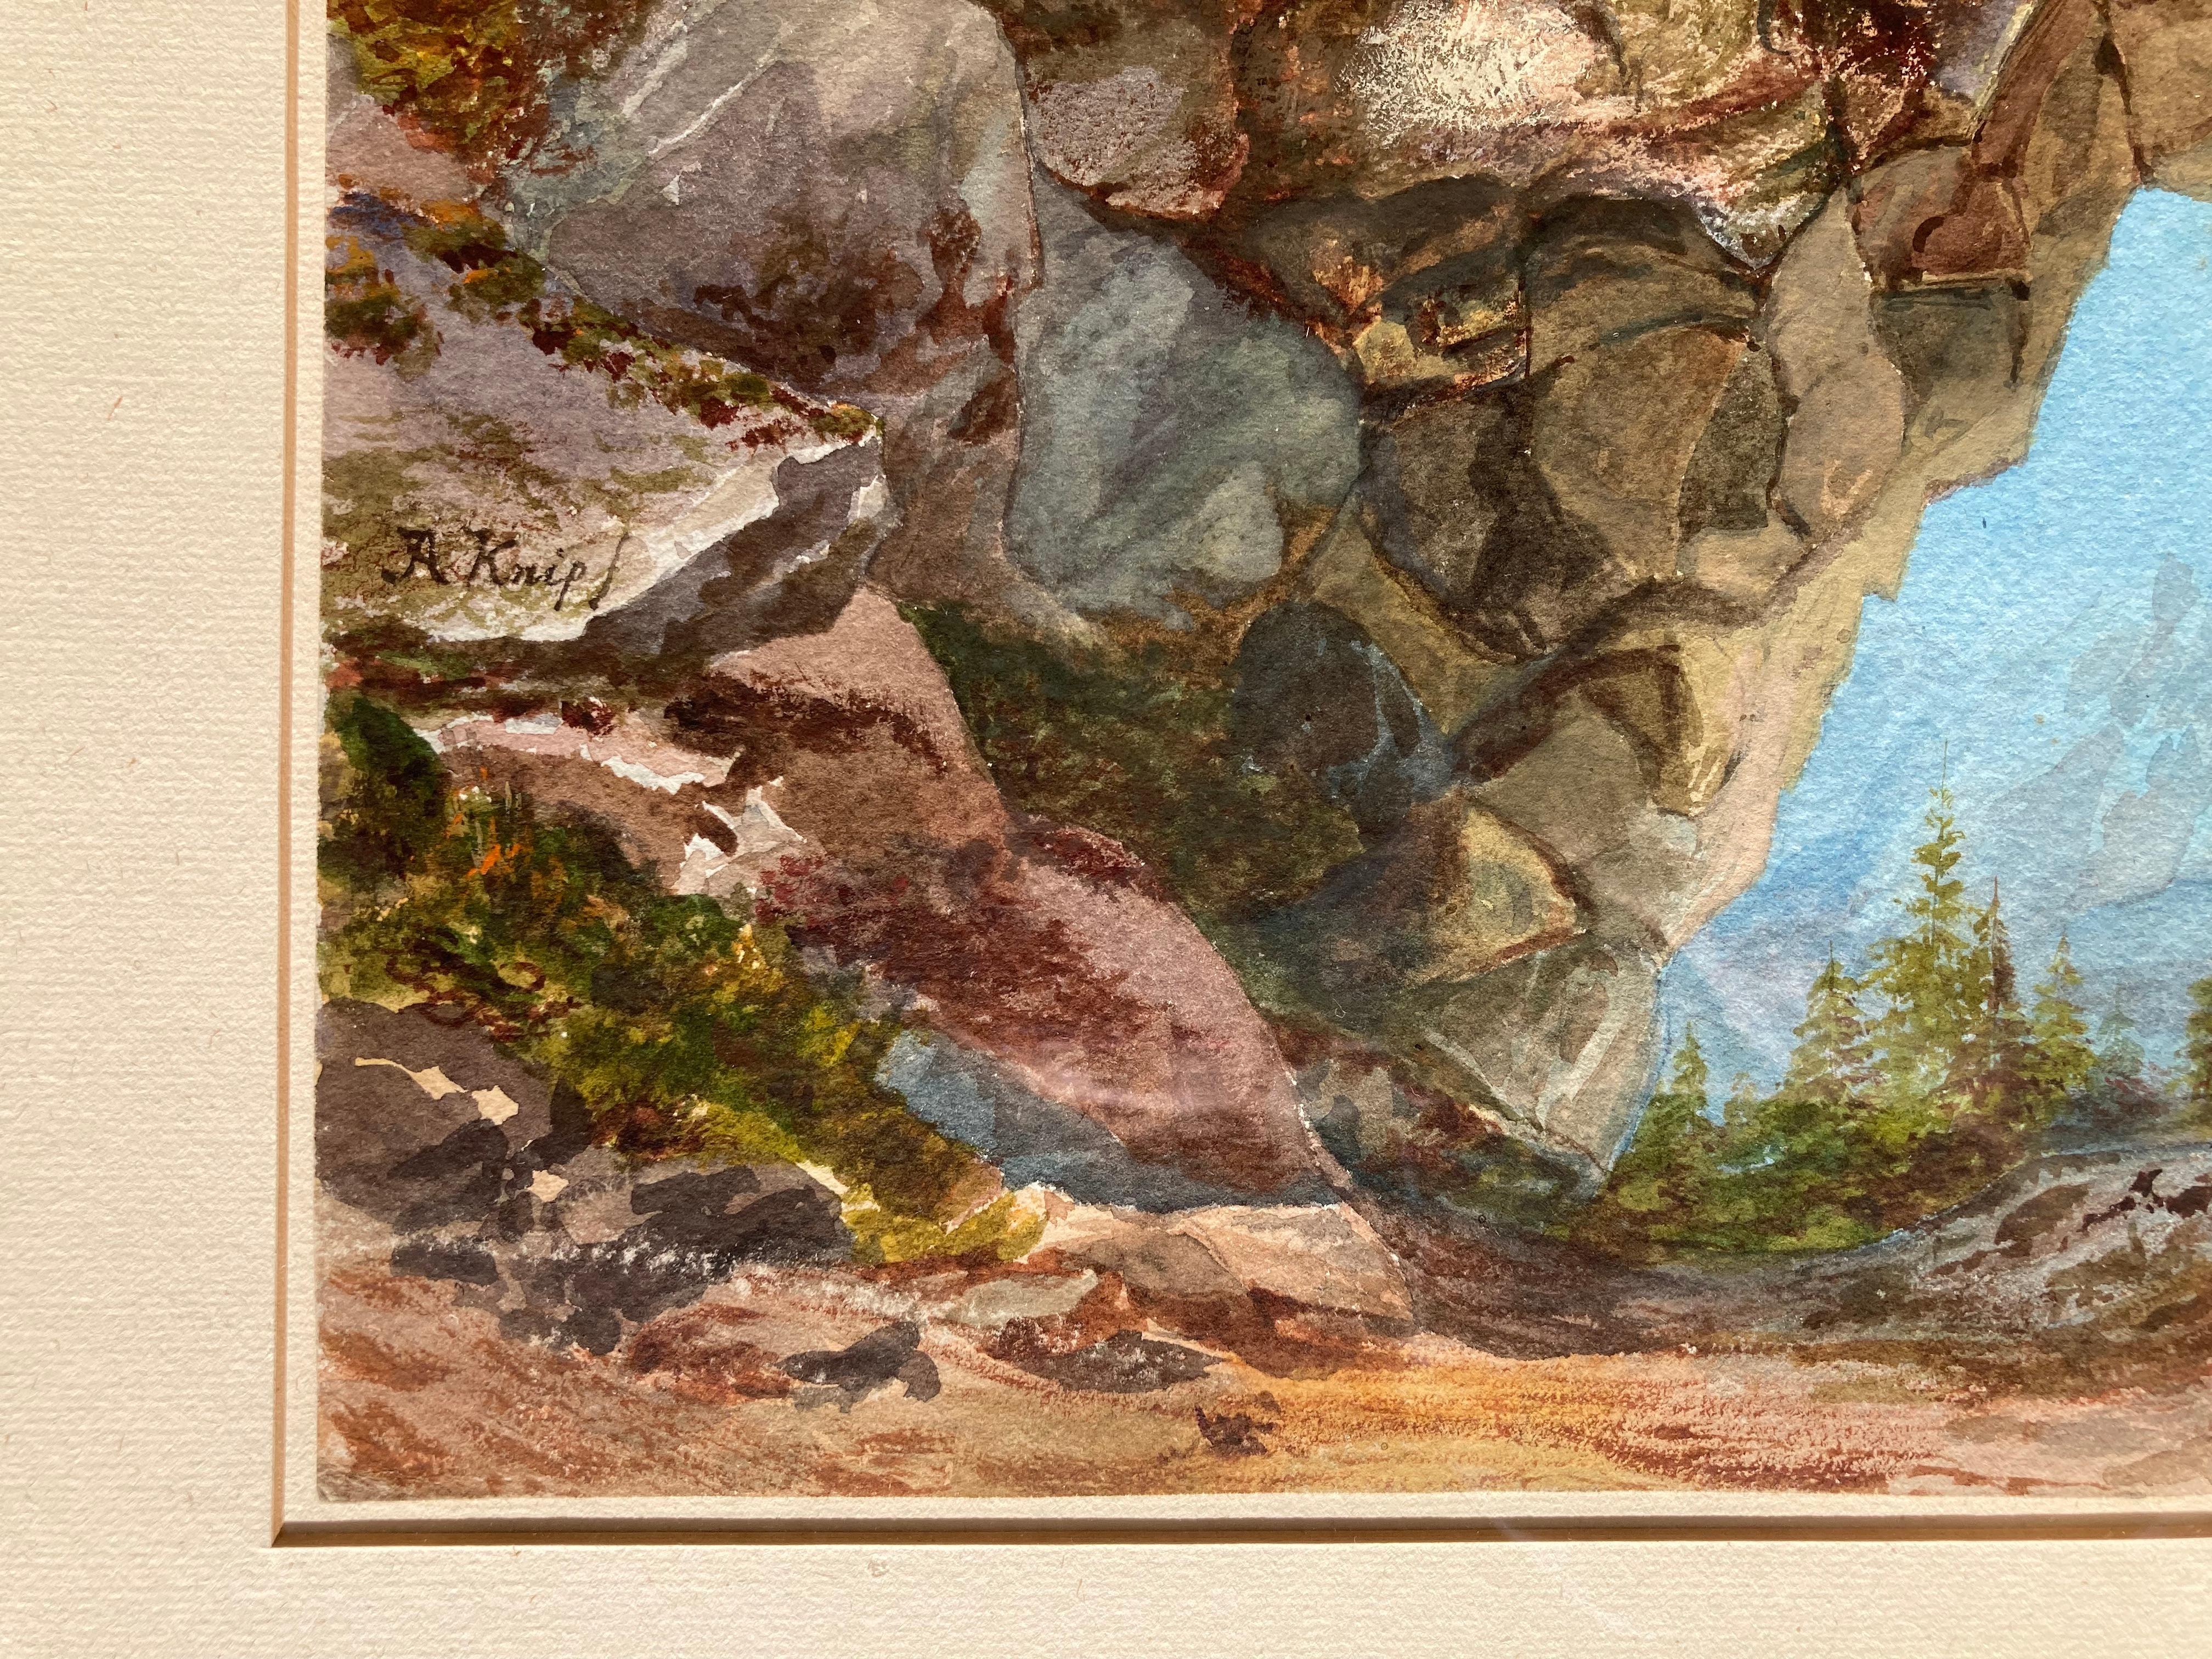 Josephus Augustus KNIP
Tilbourg 1777 - Berlicum 1847

Picturesque landscape of the Alps with anthropomorphic rock
Circa 1800
Watercolor, gouache and brown ink
Signed lower left
47 x 30 cm
67 x 49 cm framed